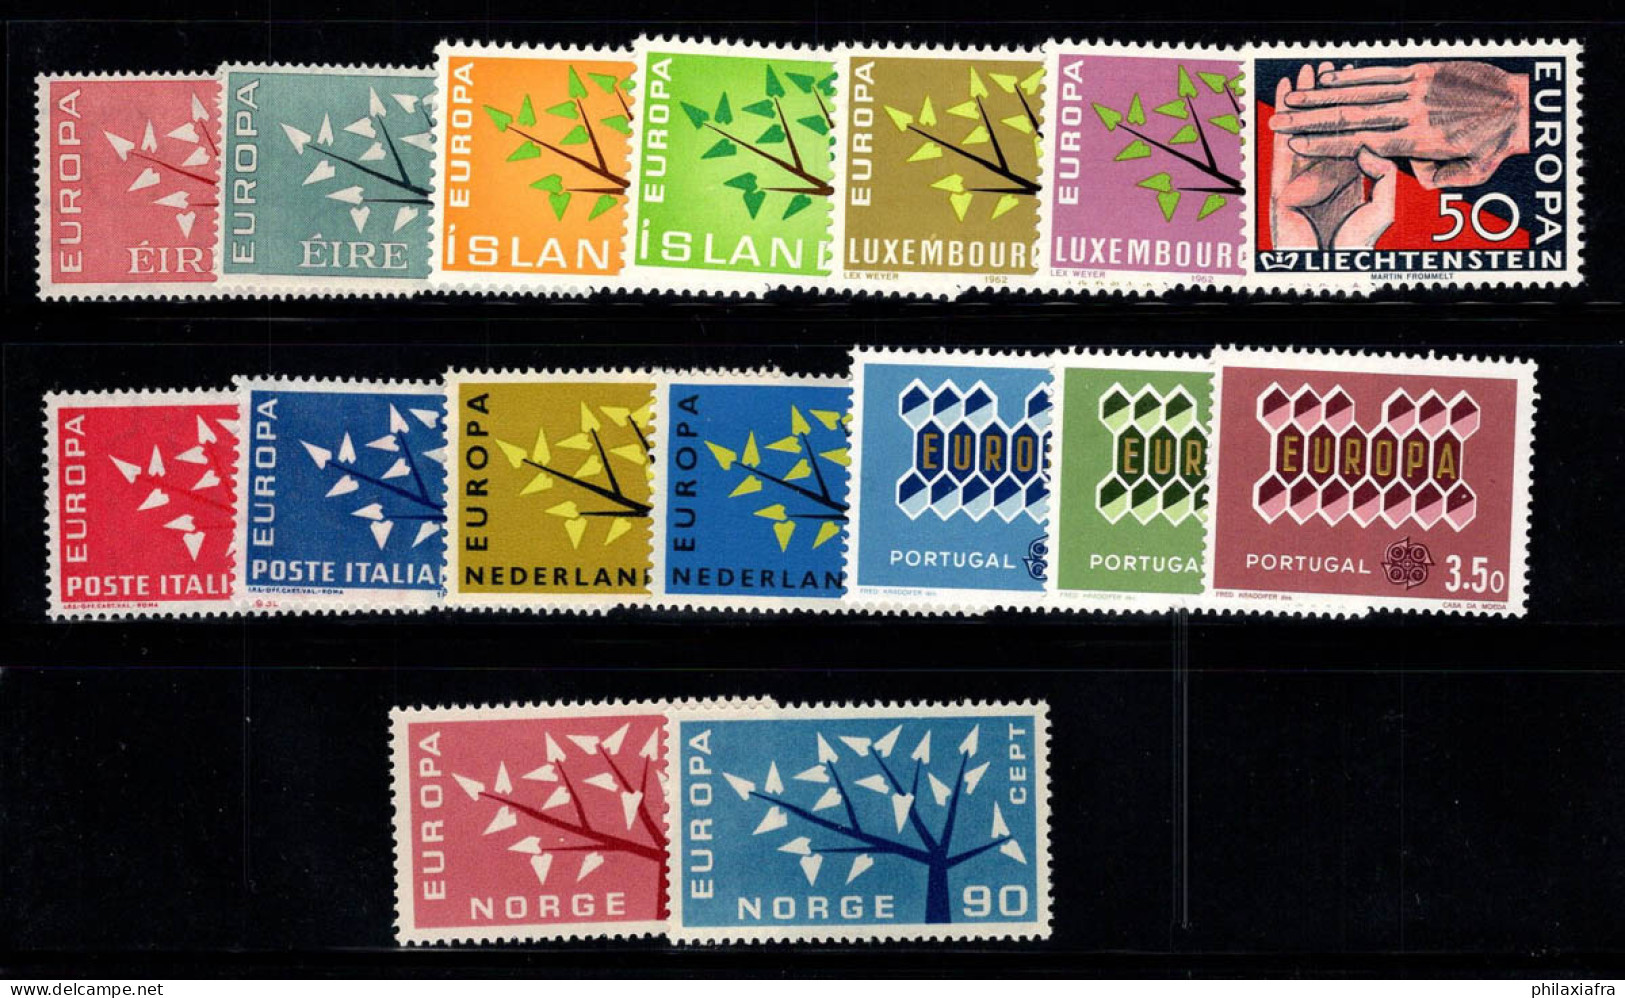 Europe CPET 1962 Neuf ** 100% Norvège, Portugal, Luxembourg - 1962